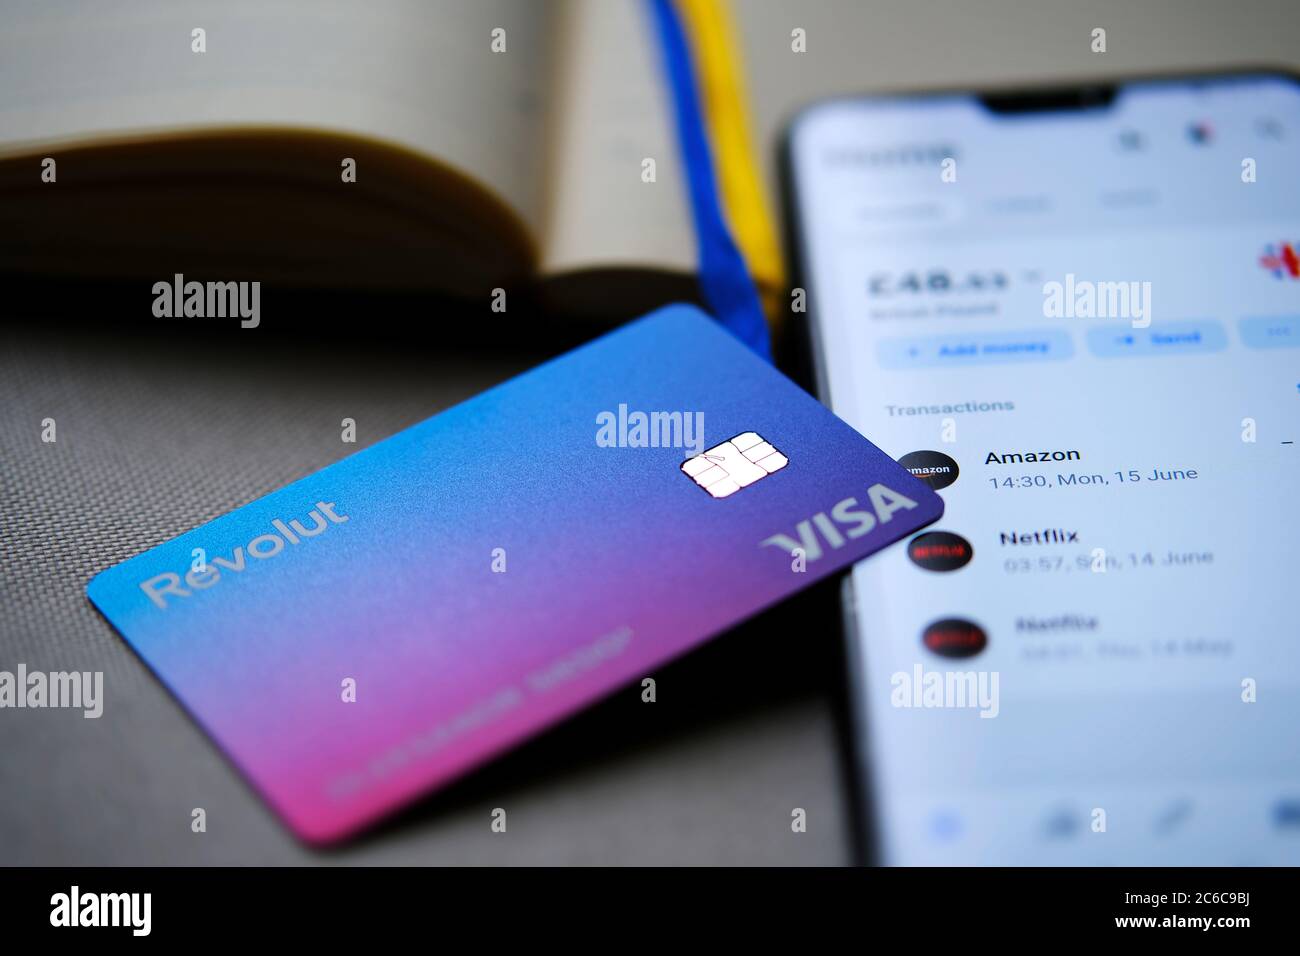 Bank App 2020 High Resolution Stock Photography and Images - Alamy